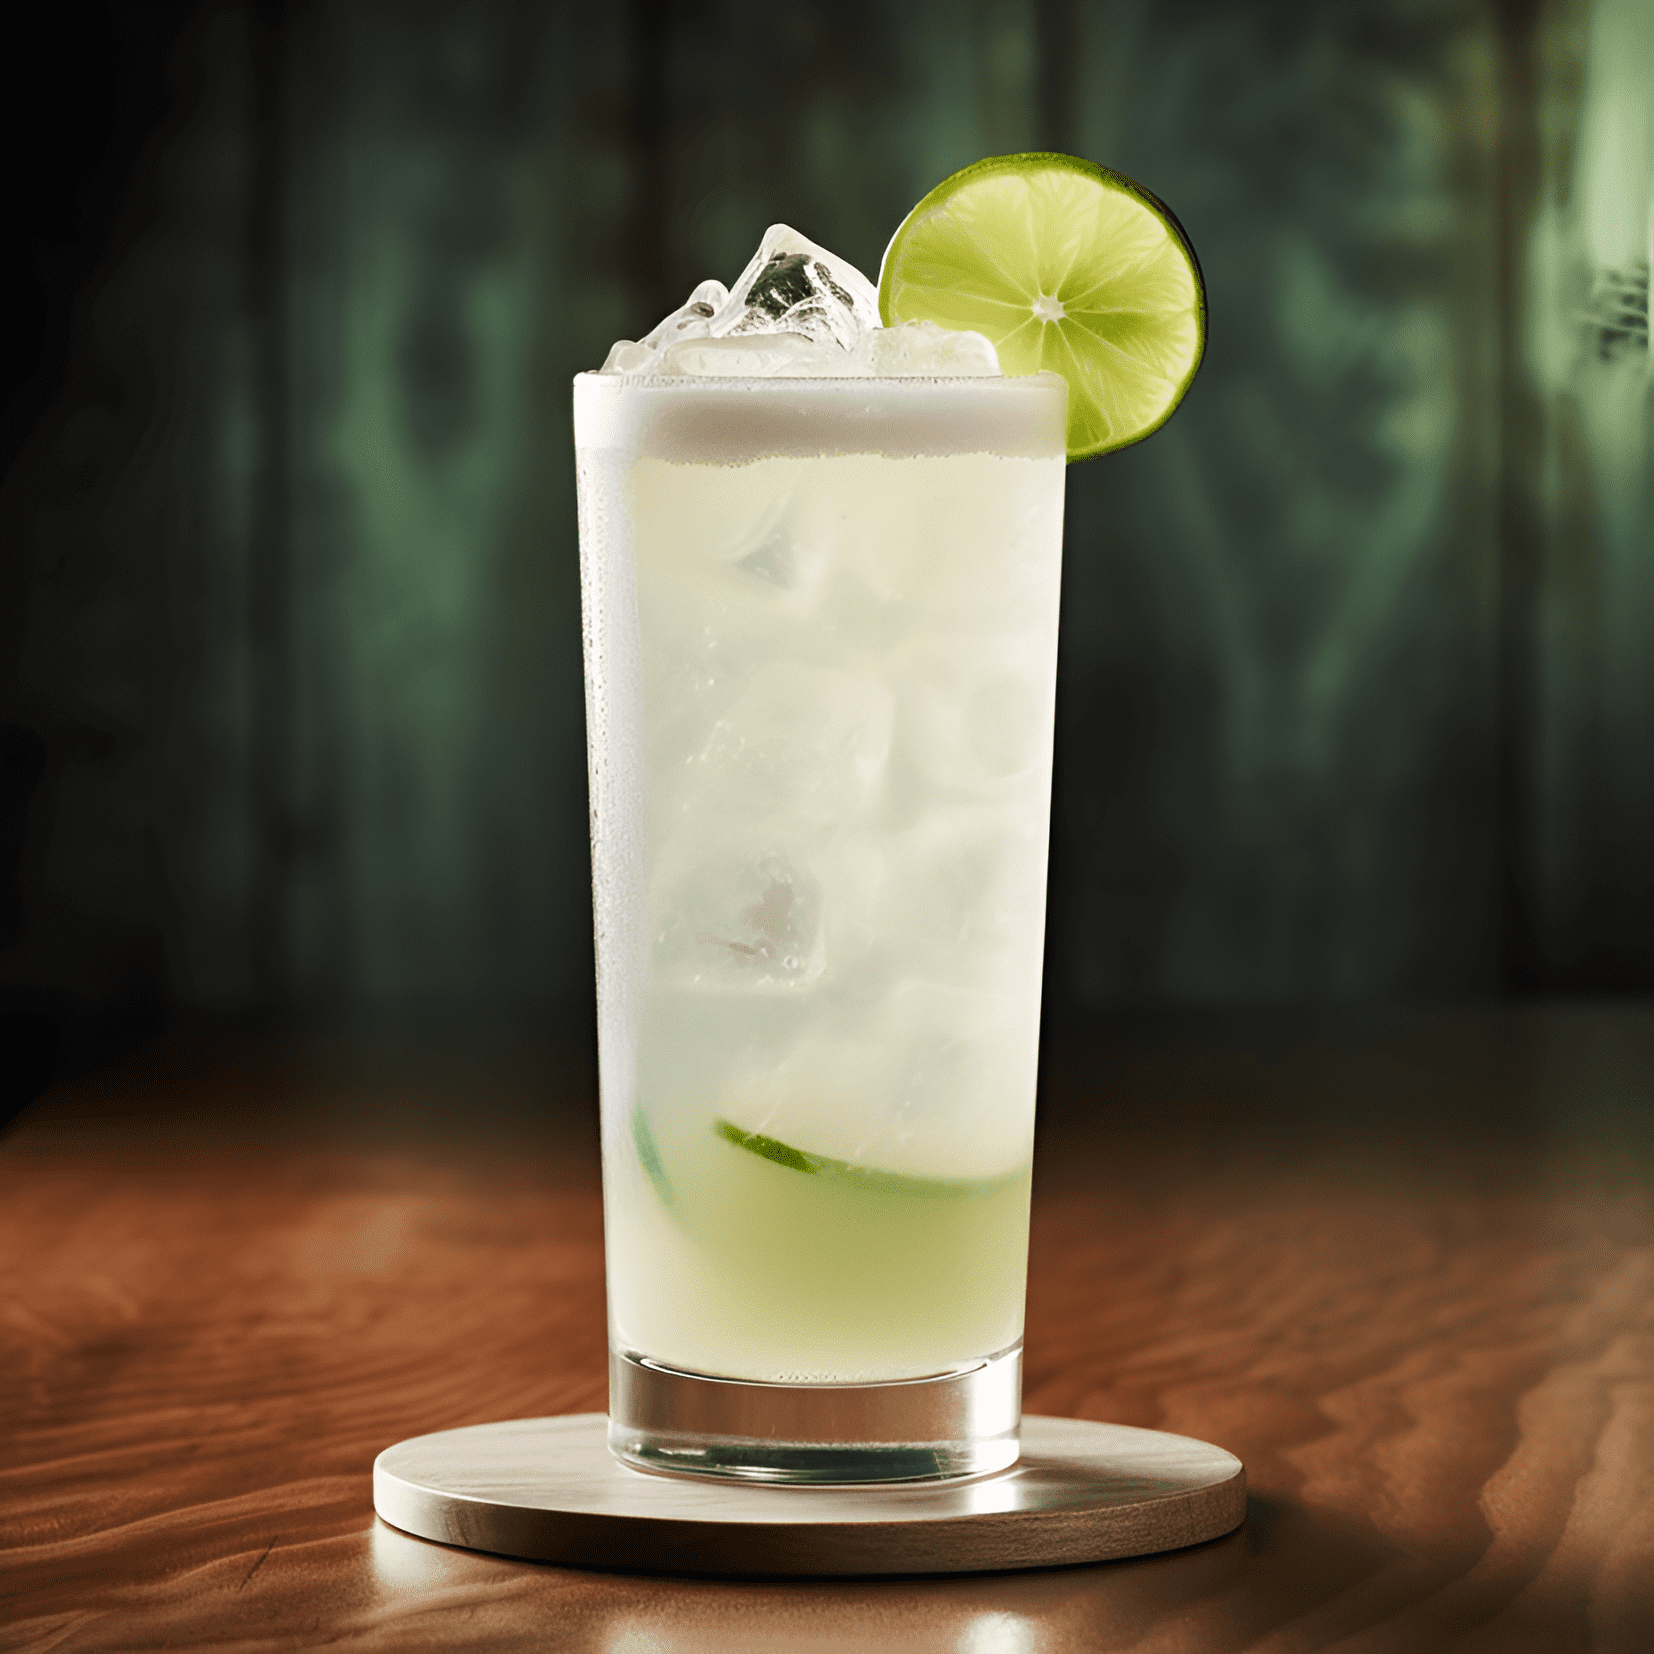 Tequila Fizz Cocktail Recipe - The Tequila Fizz has a light, crisp, and refreshing taste. It is slightly sweet with a hint of sourness from the lime juice, and the tequila adds a subtle warmth and earthiness. The effervescence from the club soda makes it a lively and invigorating drink.